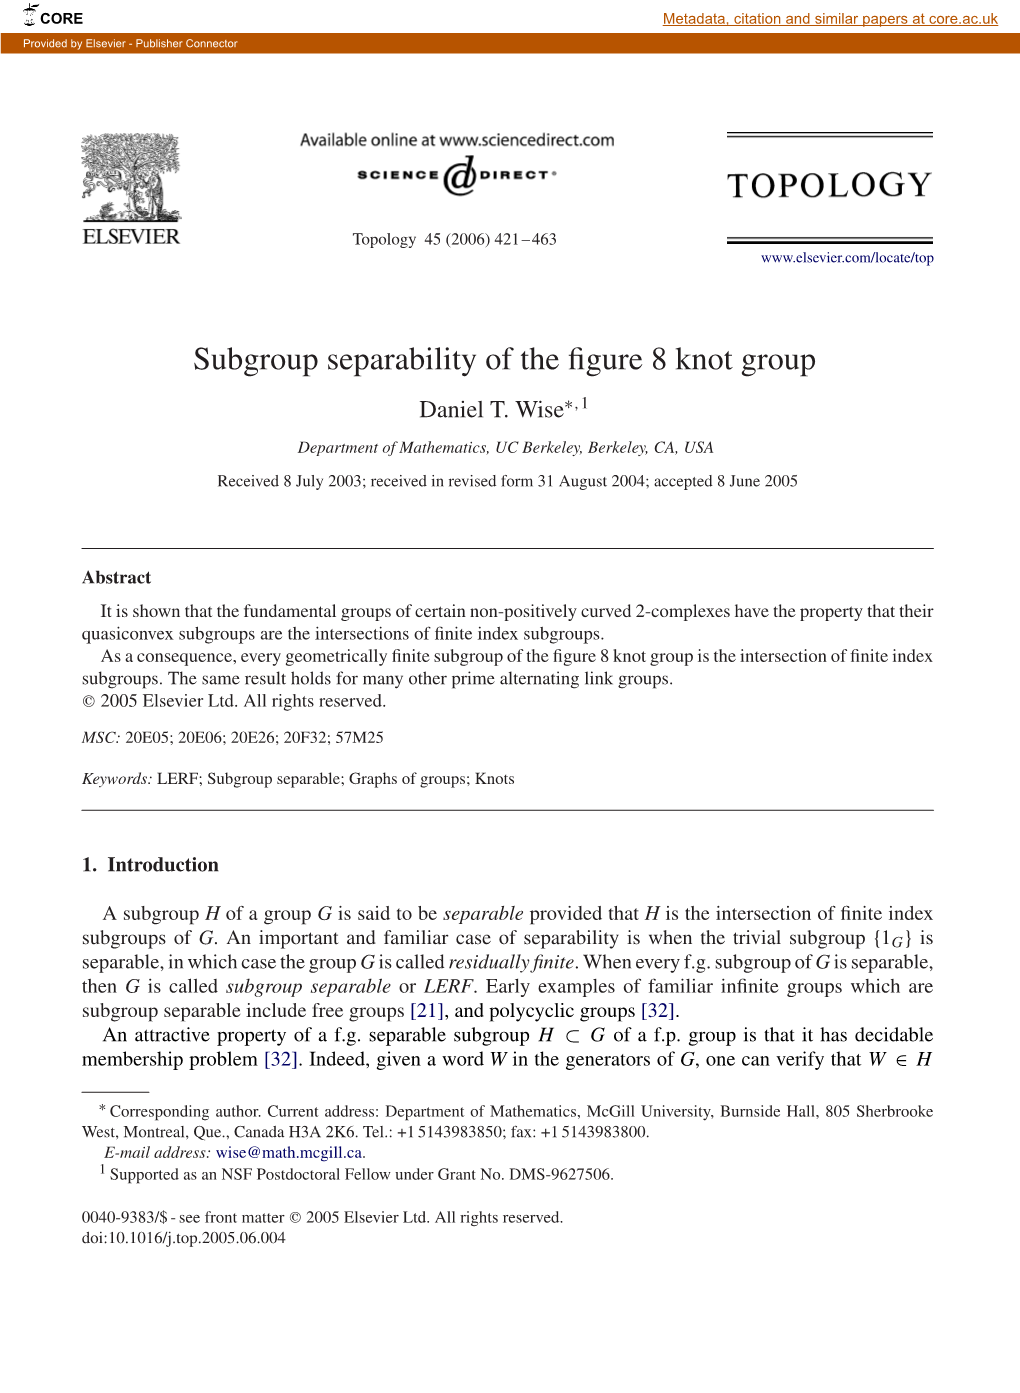 Subgroup Separability of the Figure 8 Knot Group